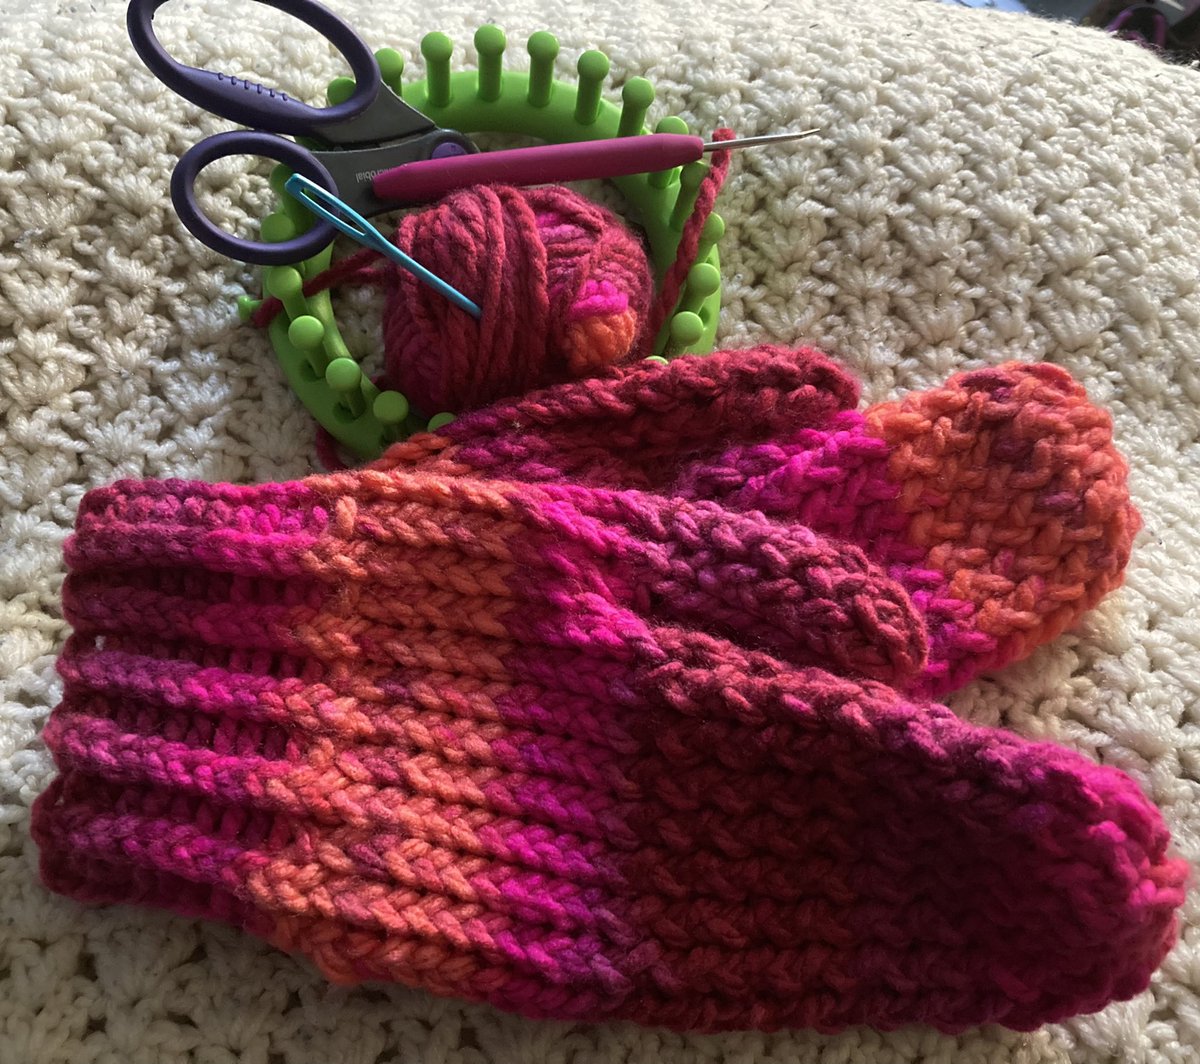 Sharing a non-school related post because we need to live the message that we teach: “Perseverance & Determination” After years of dreaming, I have finally finished knitting my first pair of mittens! They are perfectly imperfect. #smalljoys #teacherselfcare